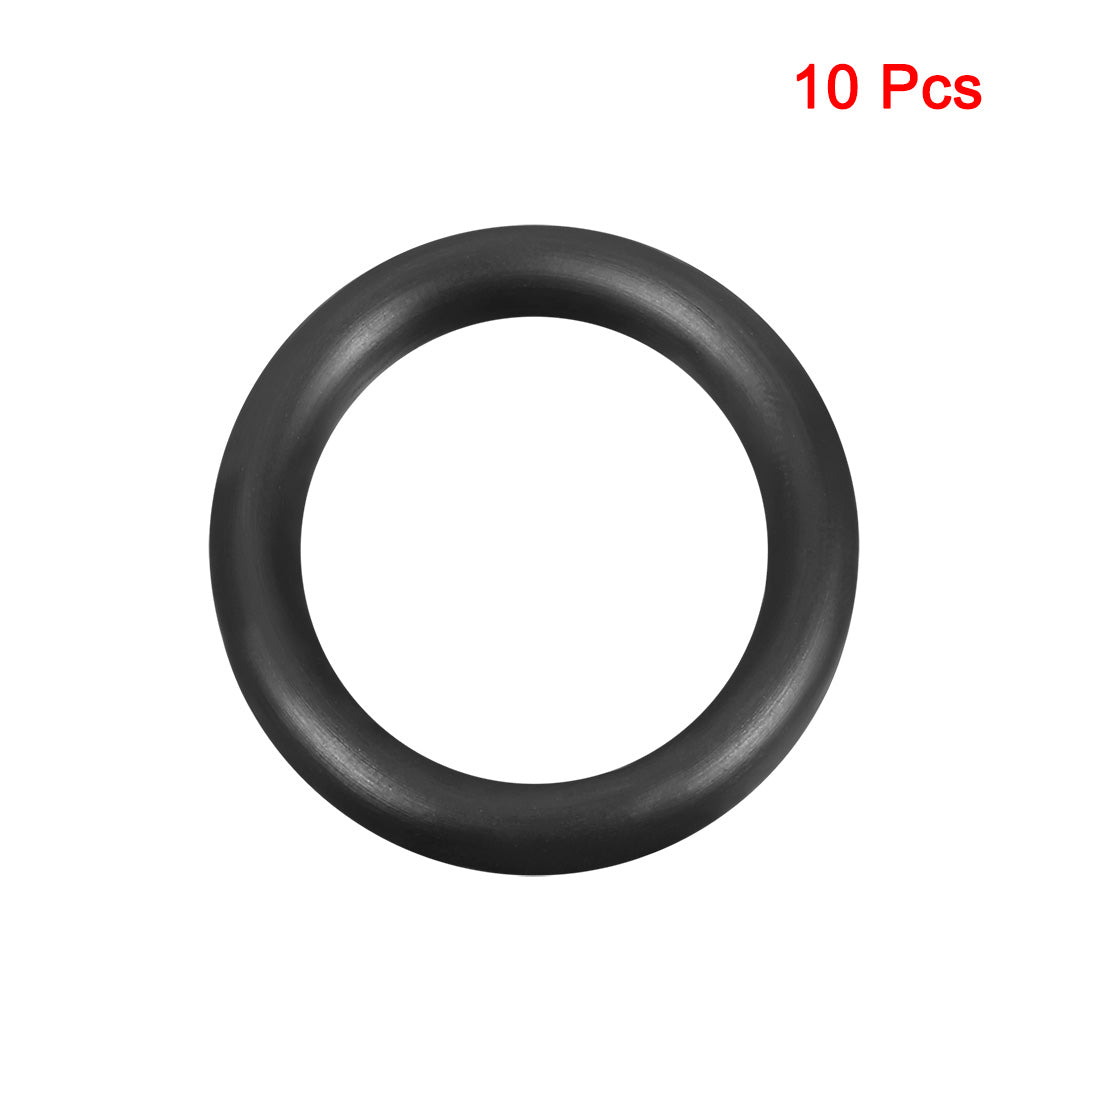 uxcell Uxcell O-Rings Nitrile Rubber 25mm x 35mm x 5mm Seal Rings Sealing Gasket 10pcs